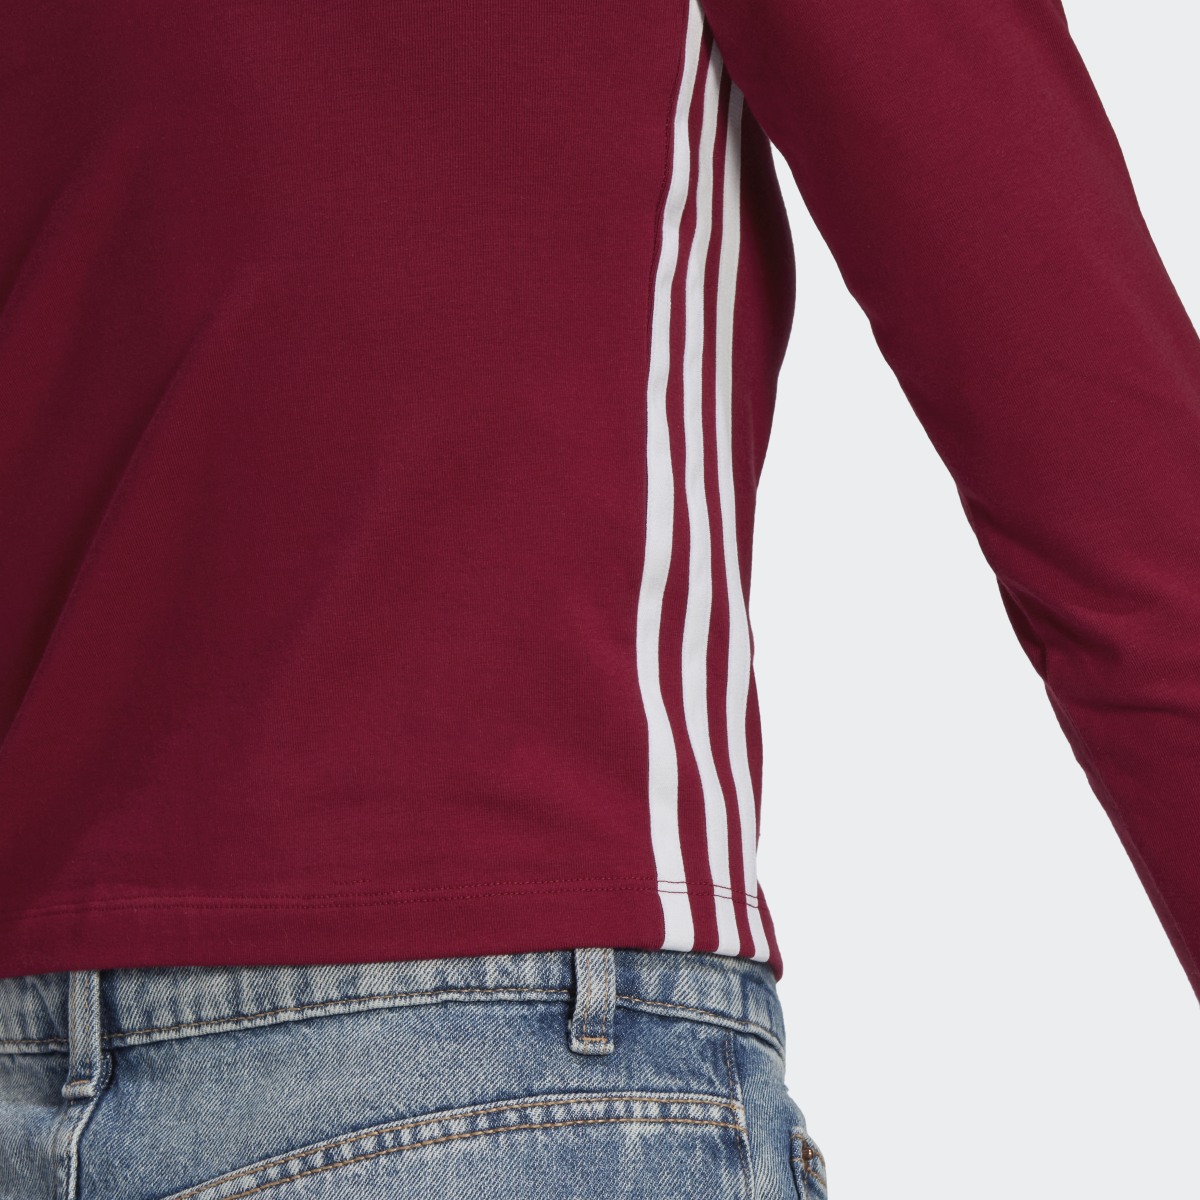 Adidas Centre Stage Cutout Top. 7